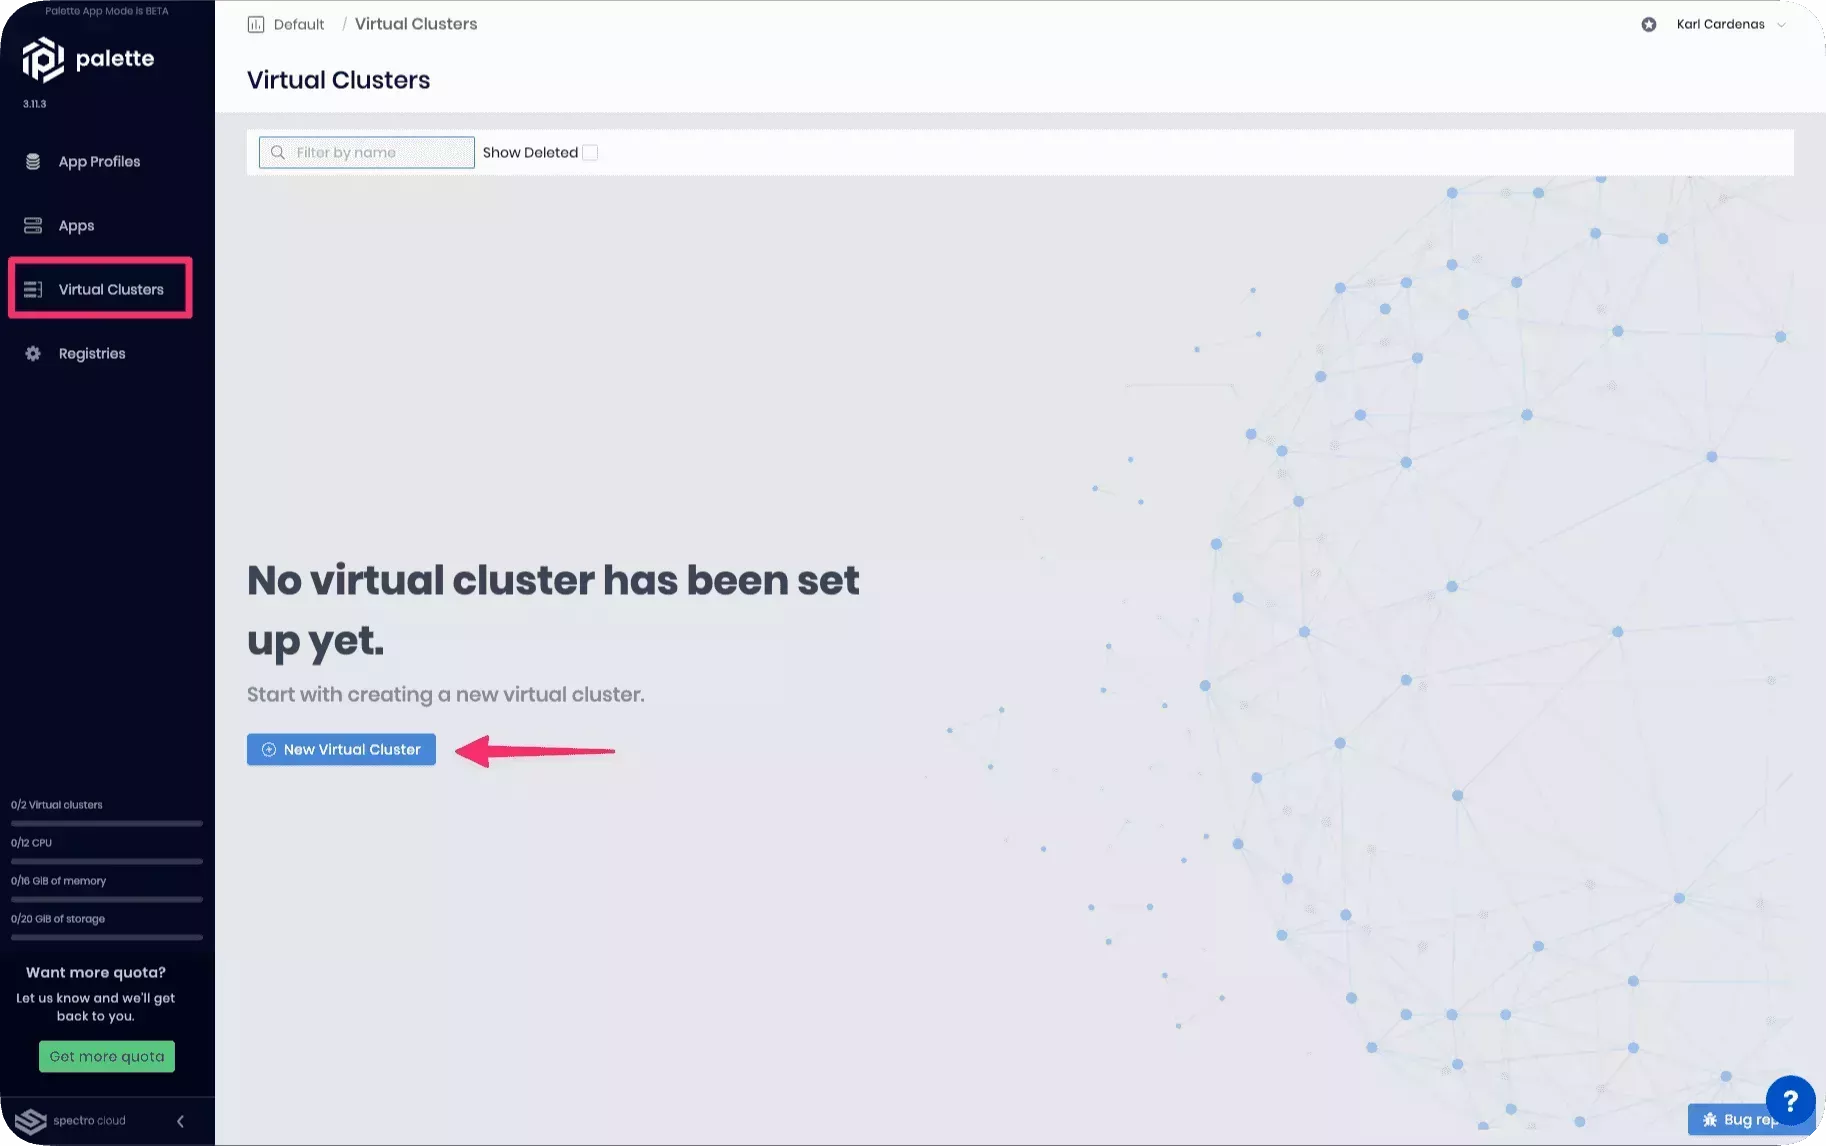 View of the virtual cluster list